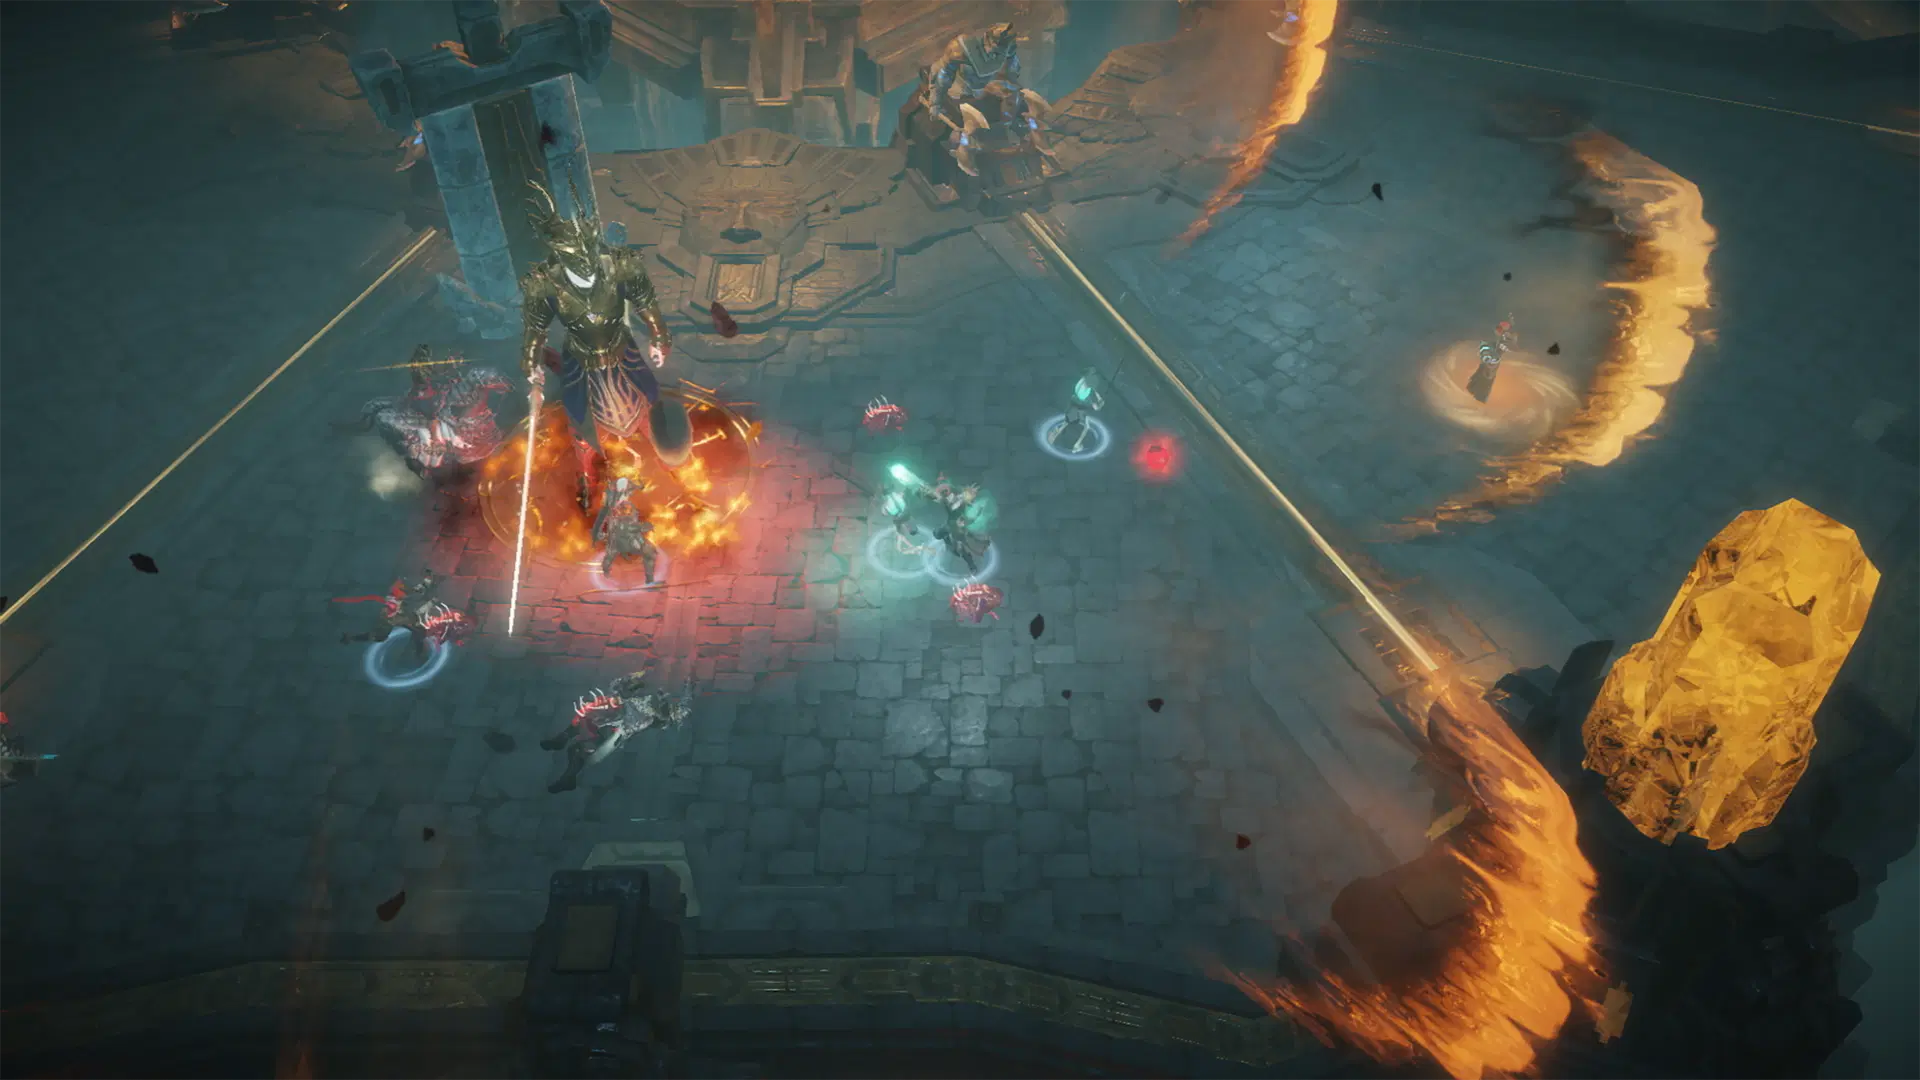 You Can Now Go Fishing In Diablo Immortal - GamerBraves